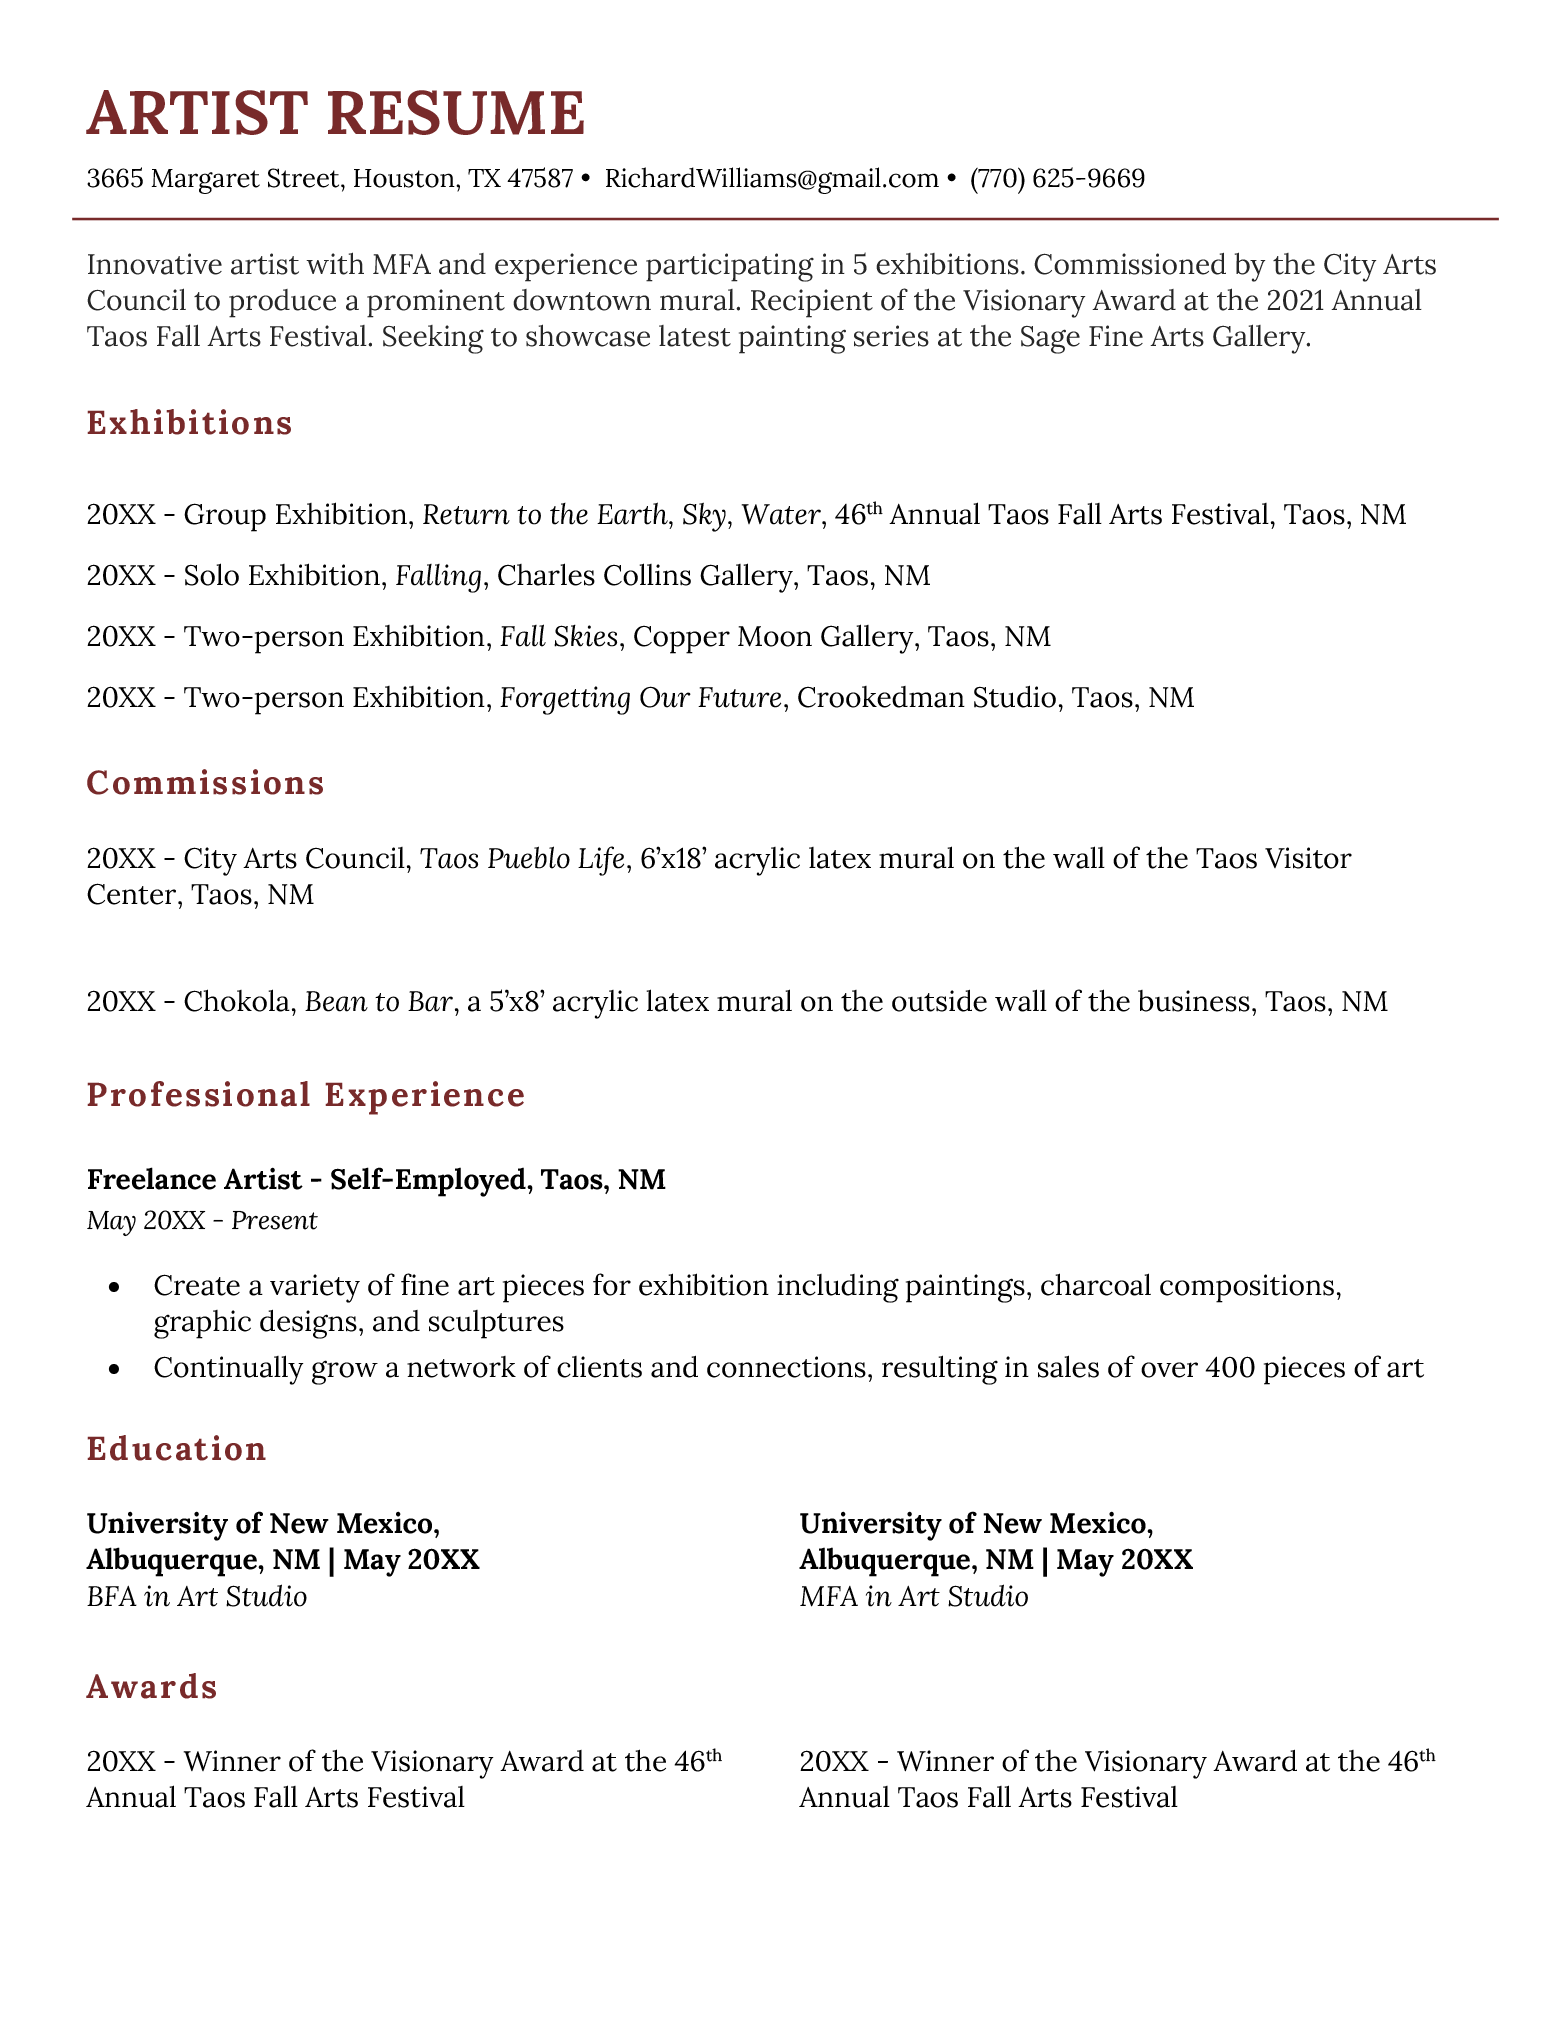 Example of an artist resume.